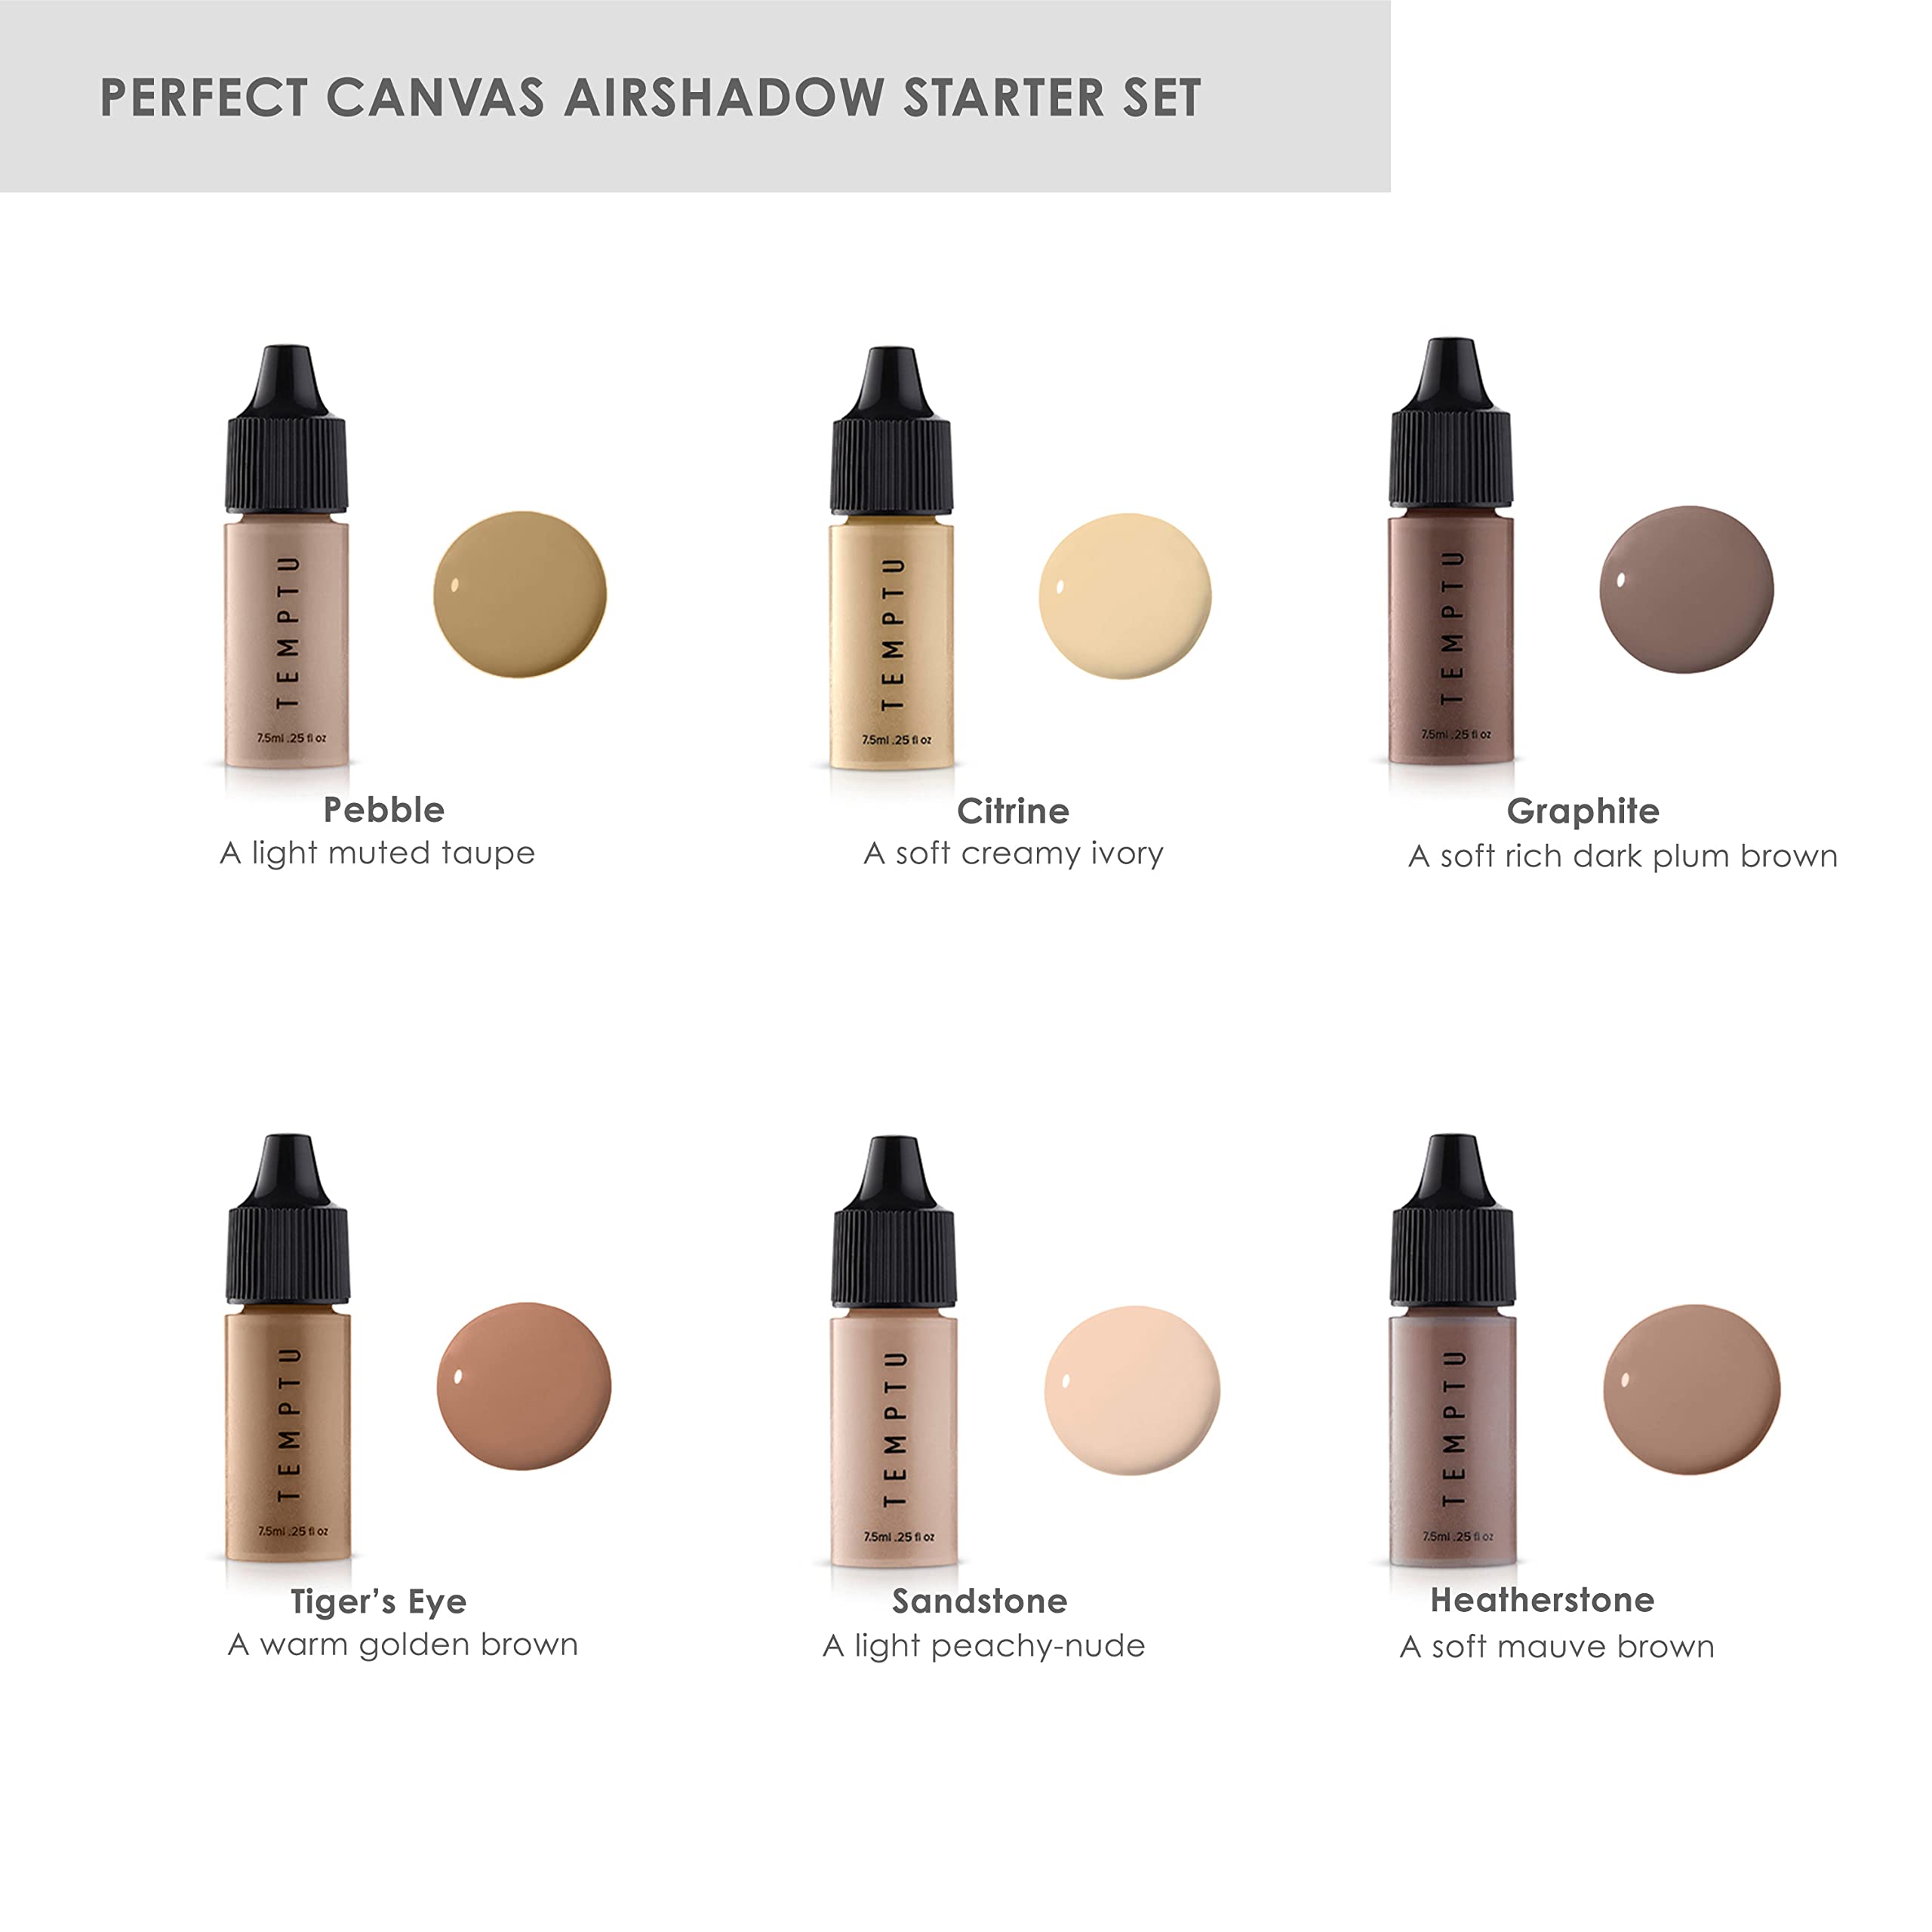 TEMPTU Perfect Canvas Airbrush Eyeshadow Starter Set: Long-lasting, Quick-Setting Airbrush Eyeshadows | Neutral, Earth-Toned Palette | Includes 6 Shades